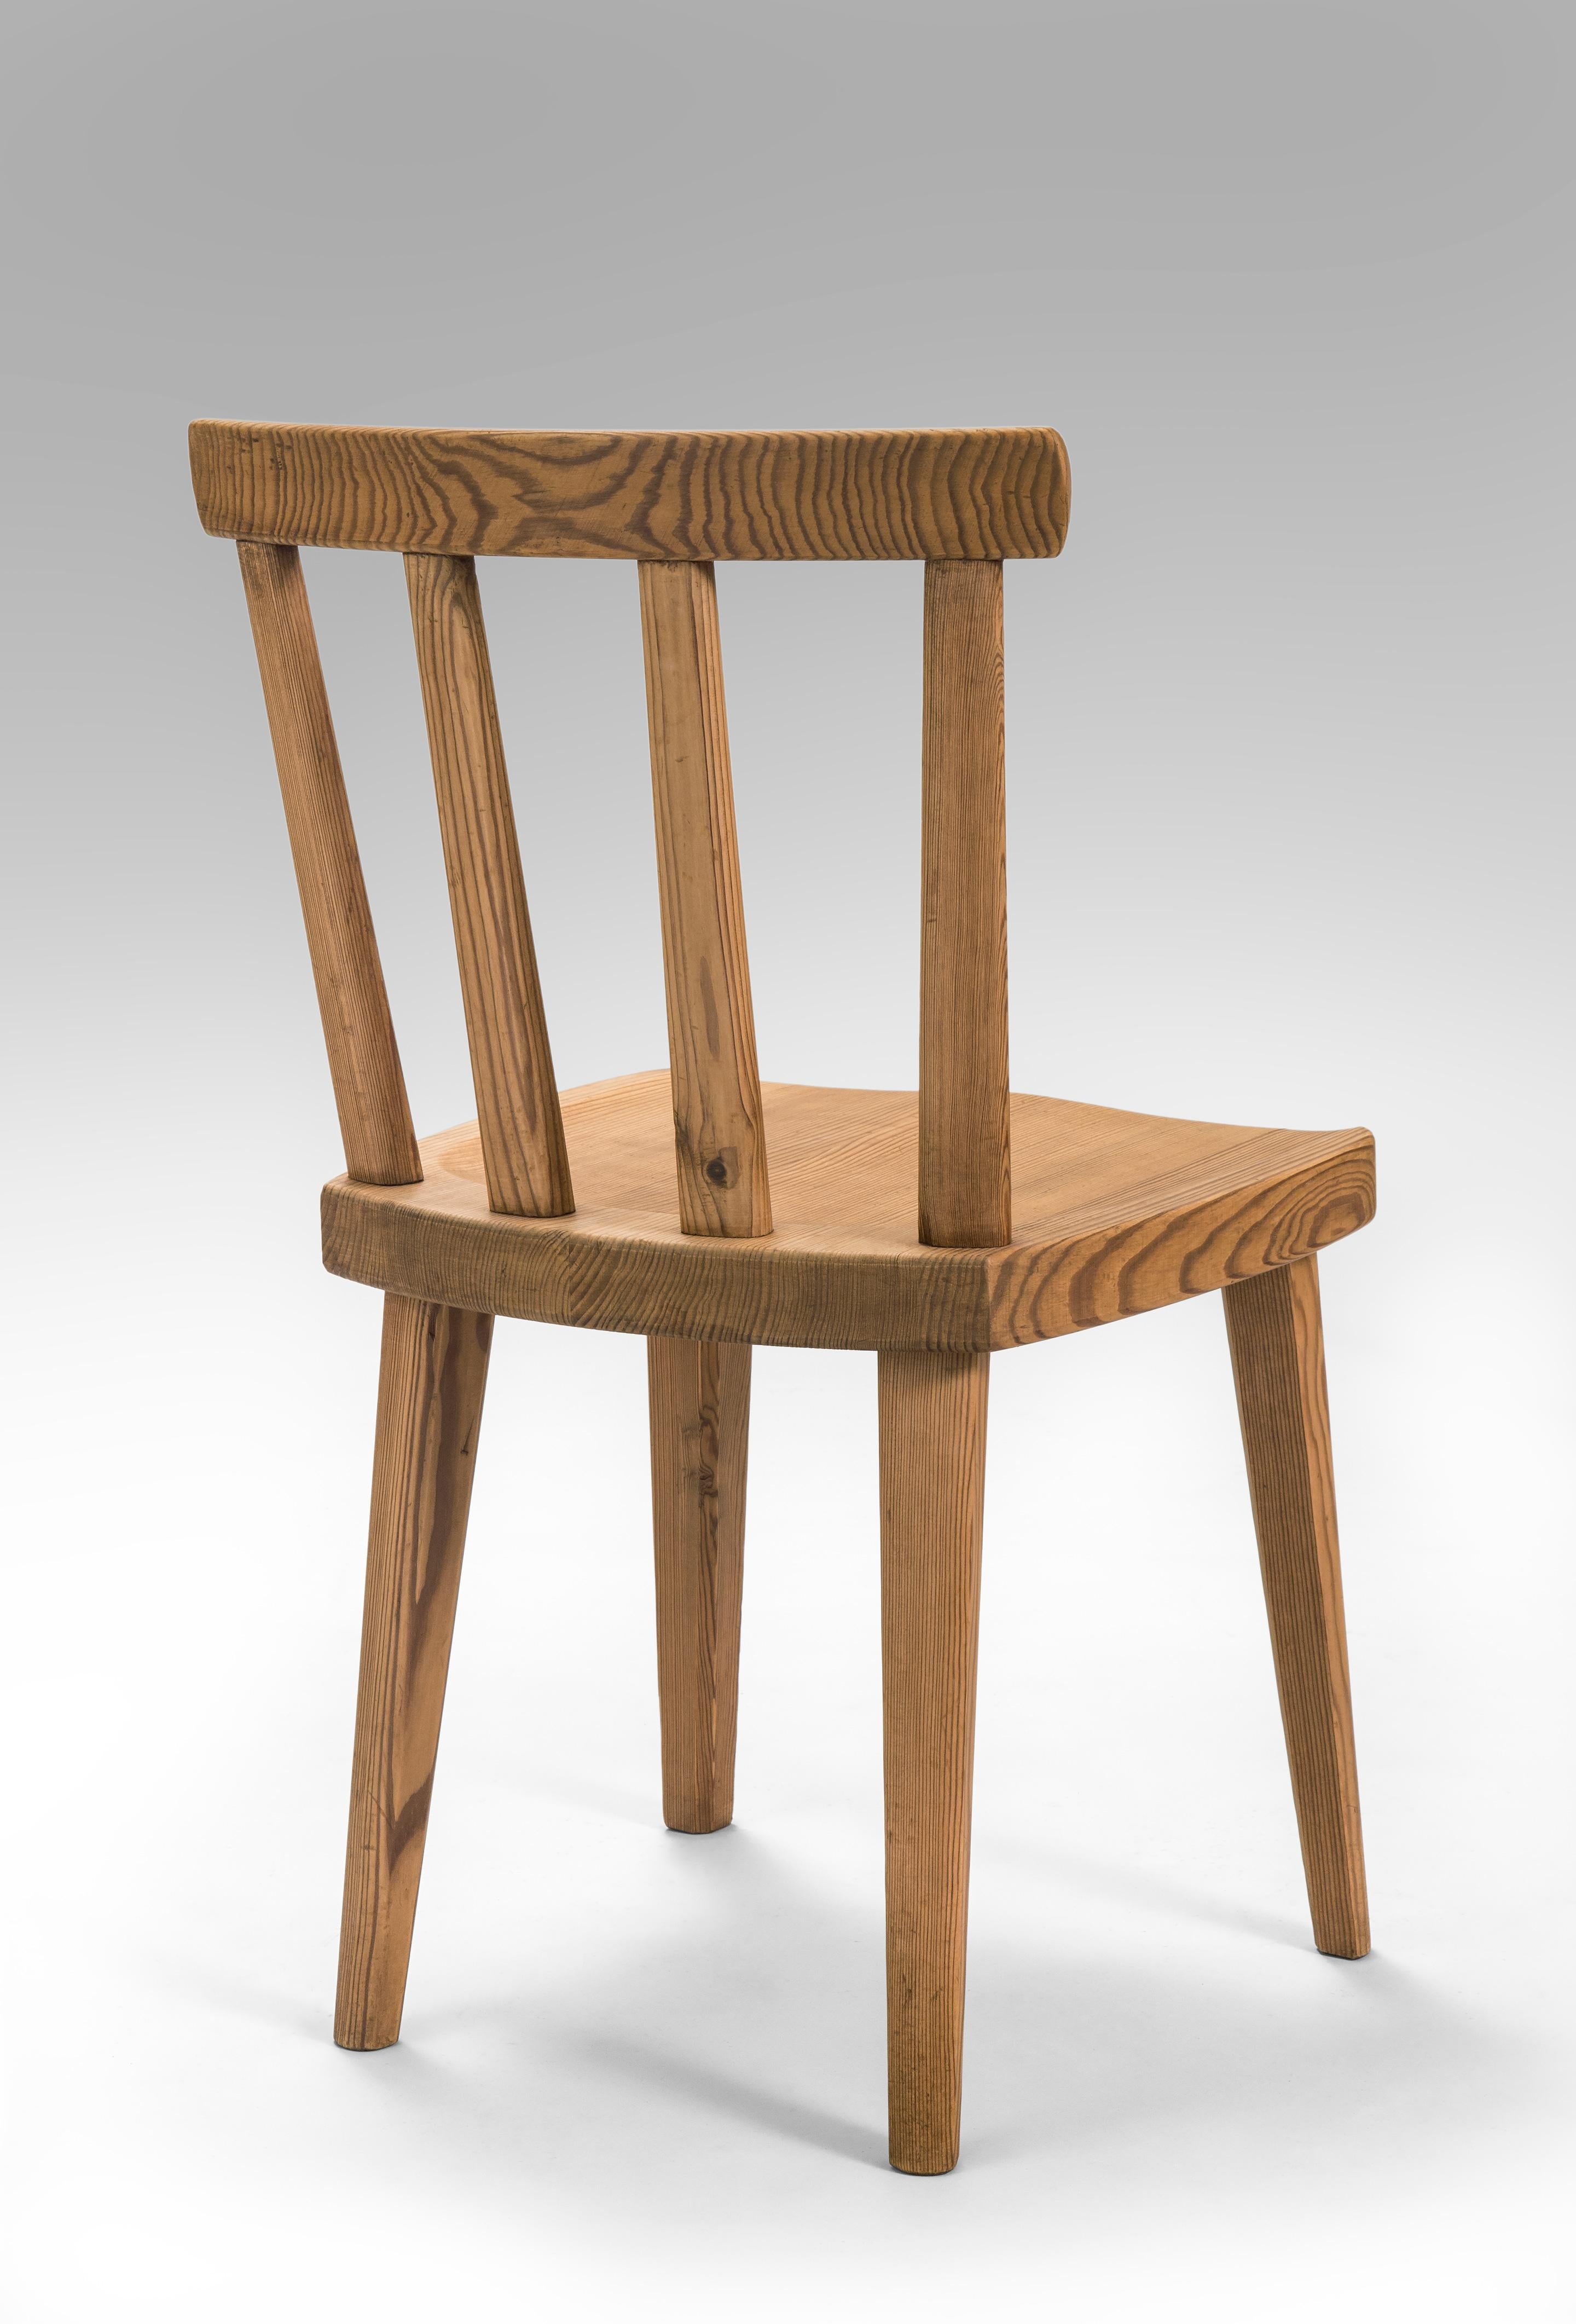 Axel Einar Hjorth, for Nordiska Kompaniet, Set of 6 Solid Pine Utö Chairs In Good Condition For Sale In New York, NY